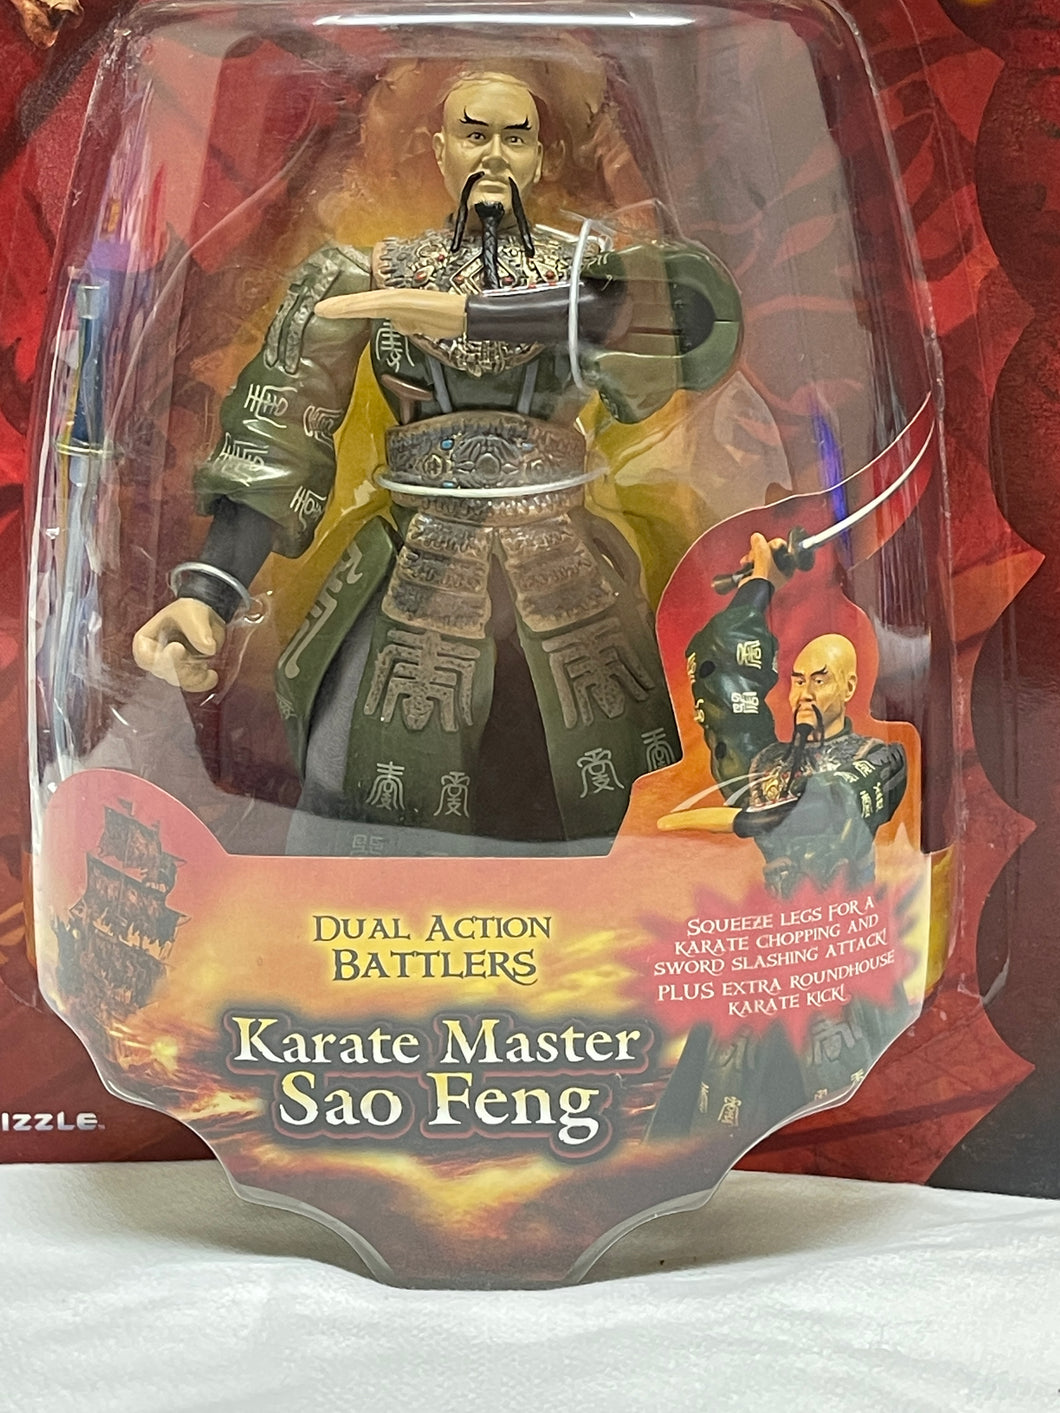 Zizzle 2007 Pirates Of The Caribbean Karate Master Sao Feng Dual Action Battlers